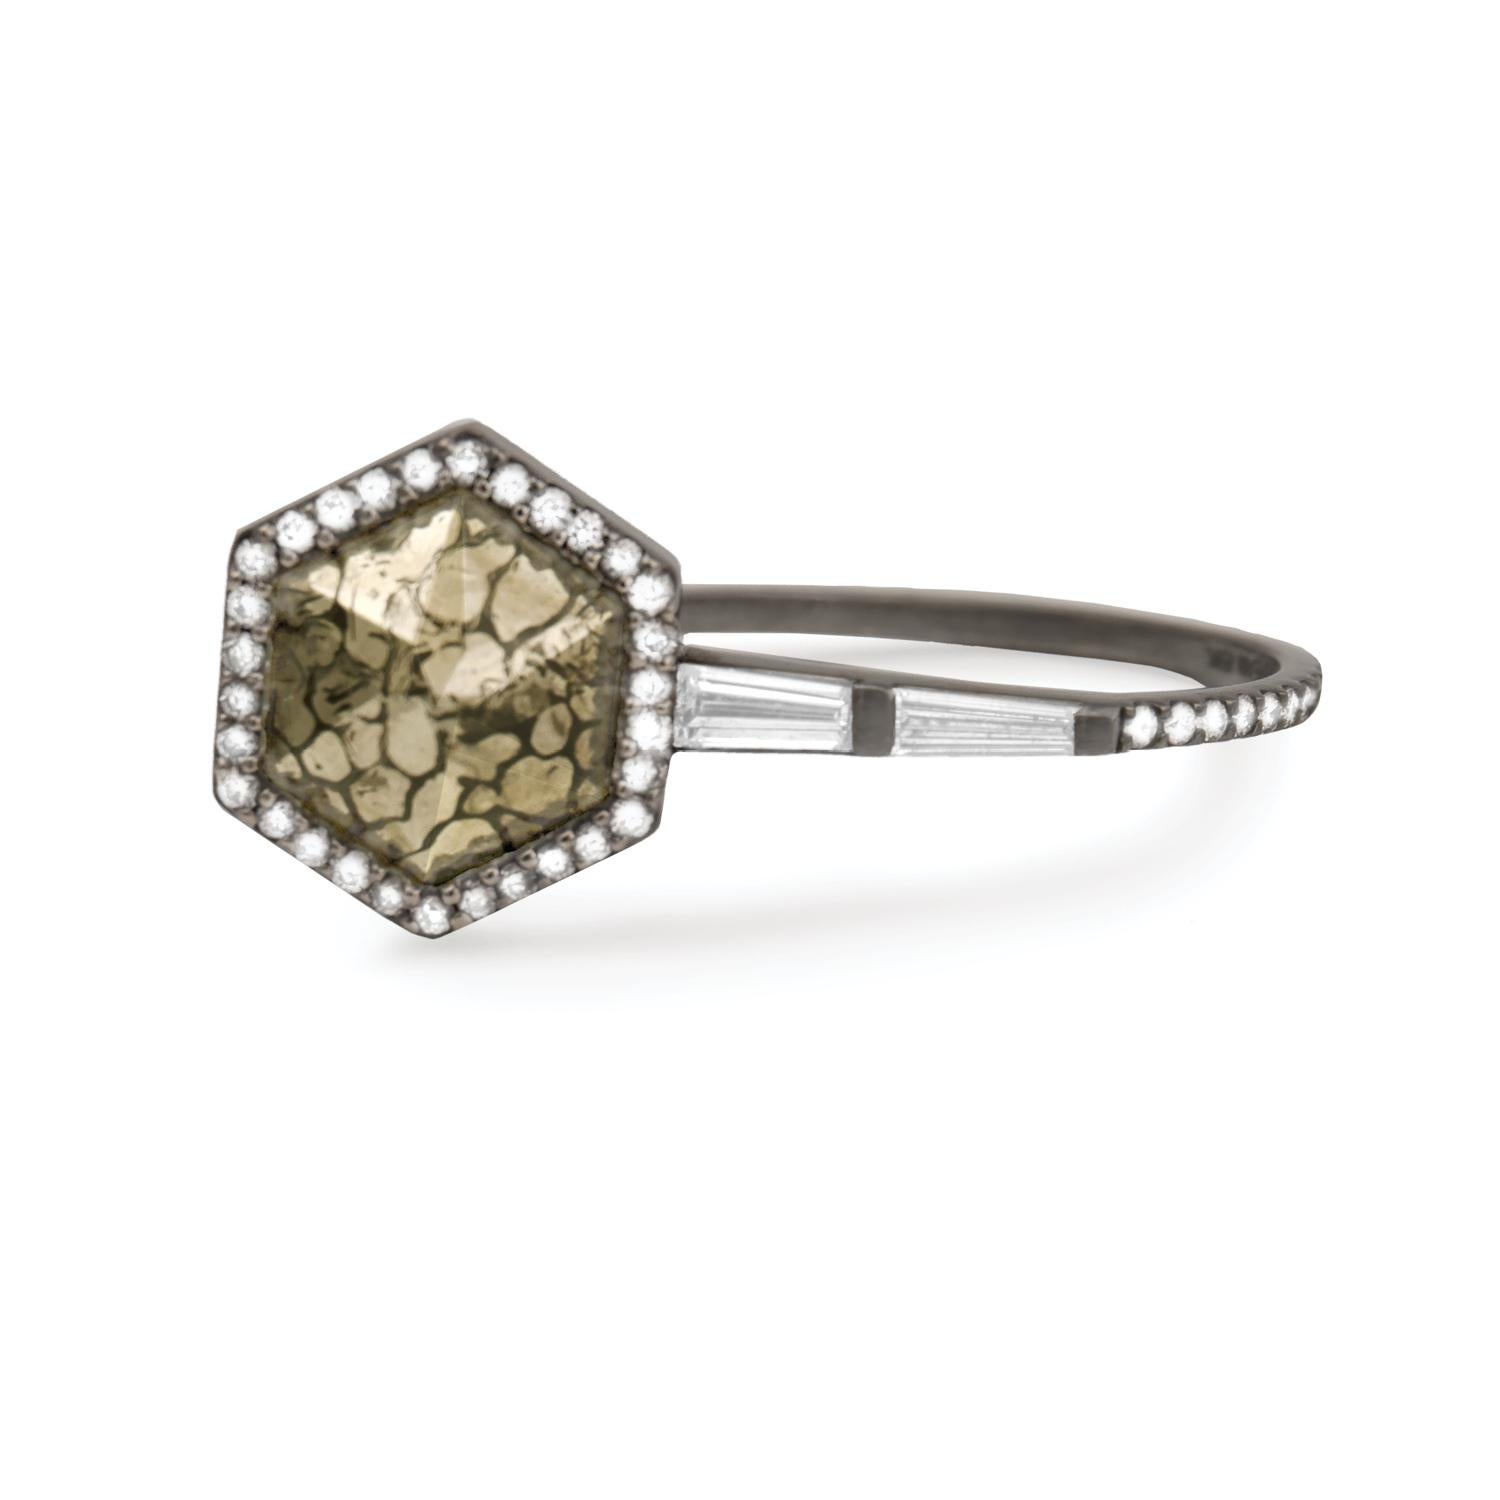 Pyritized dinosaur bone hexagonal ring with white diamond baguettes and white diamond pavé, 18 carat recycled oxidized white gold, 0.31 TCW  - One-of-a-kind

Inspired by Péan's travels to Naoshima Island, Japan, this ring features a hexagonal